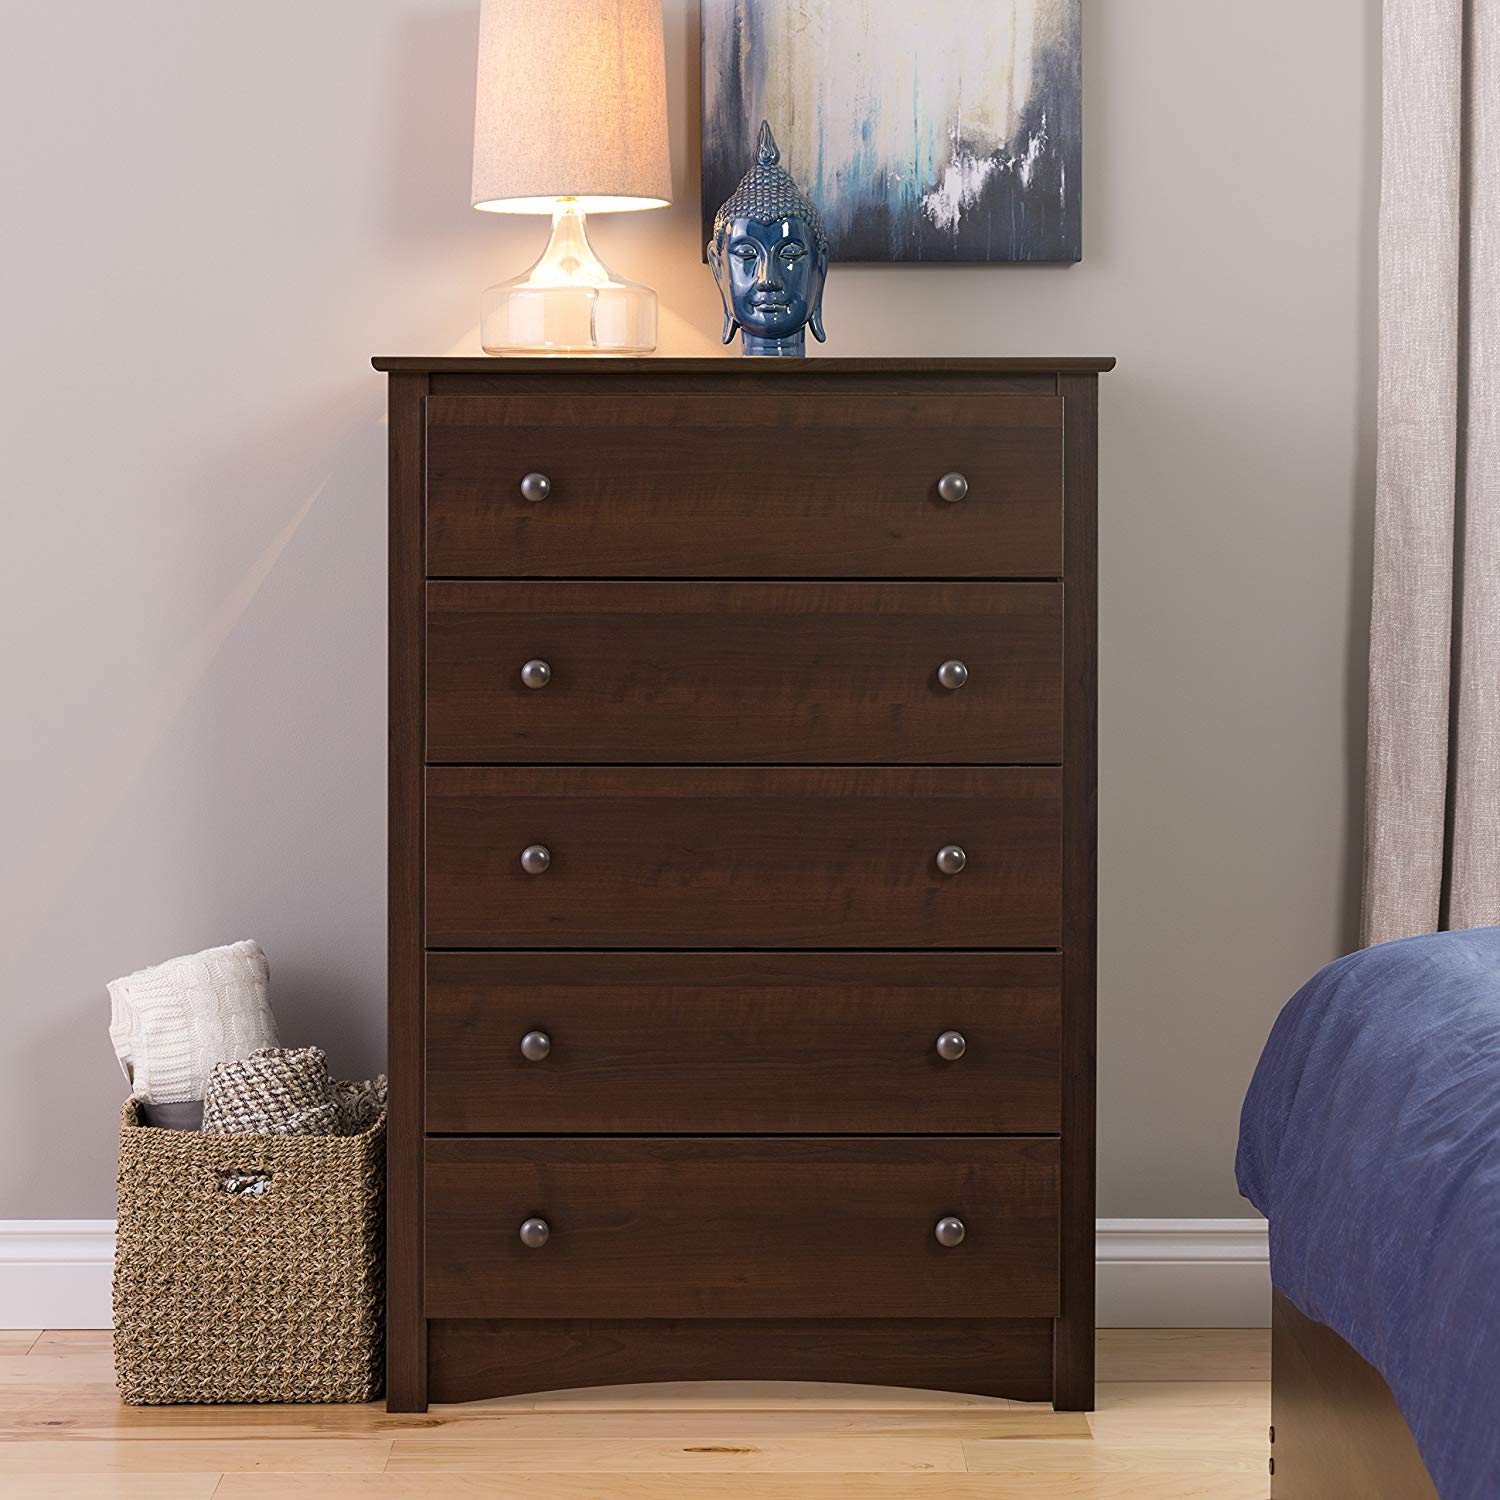 generic solid furniture is best for boys rooms